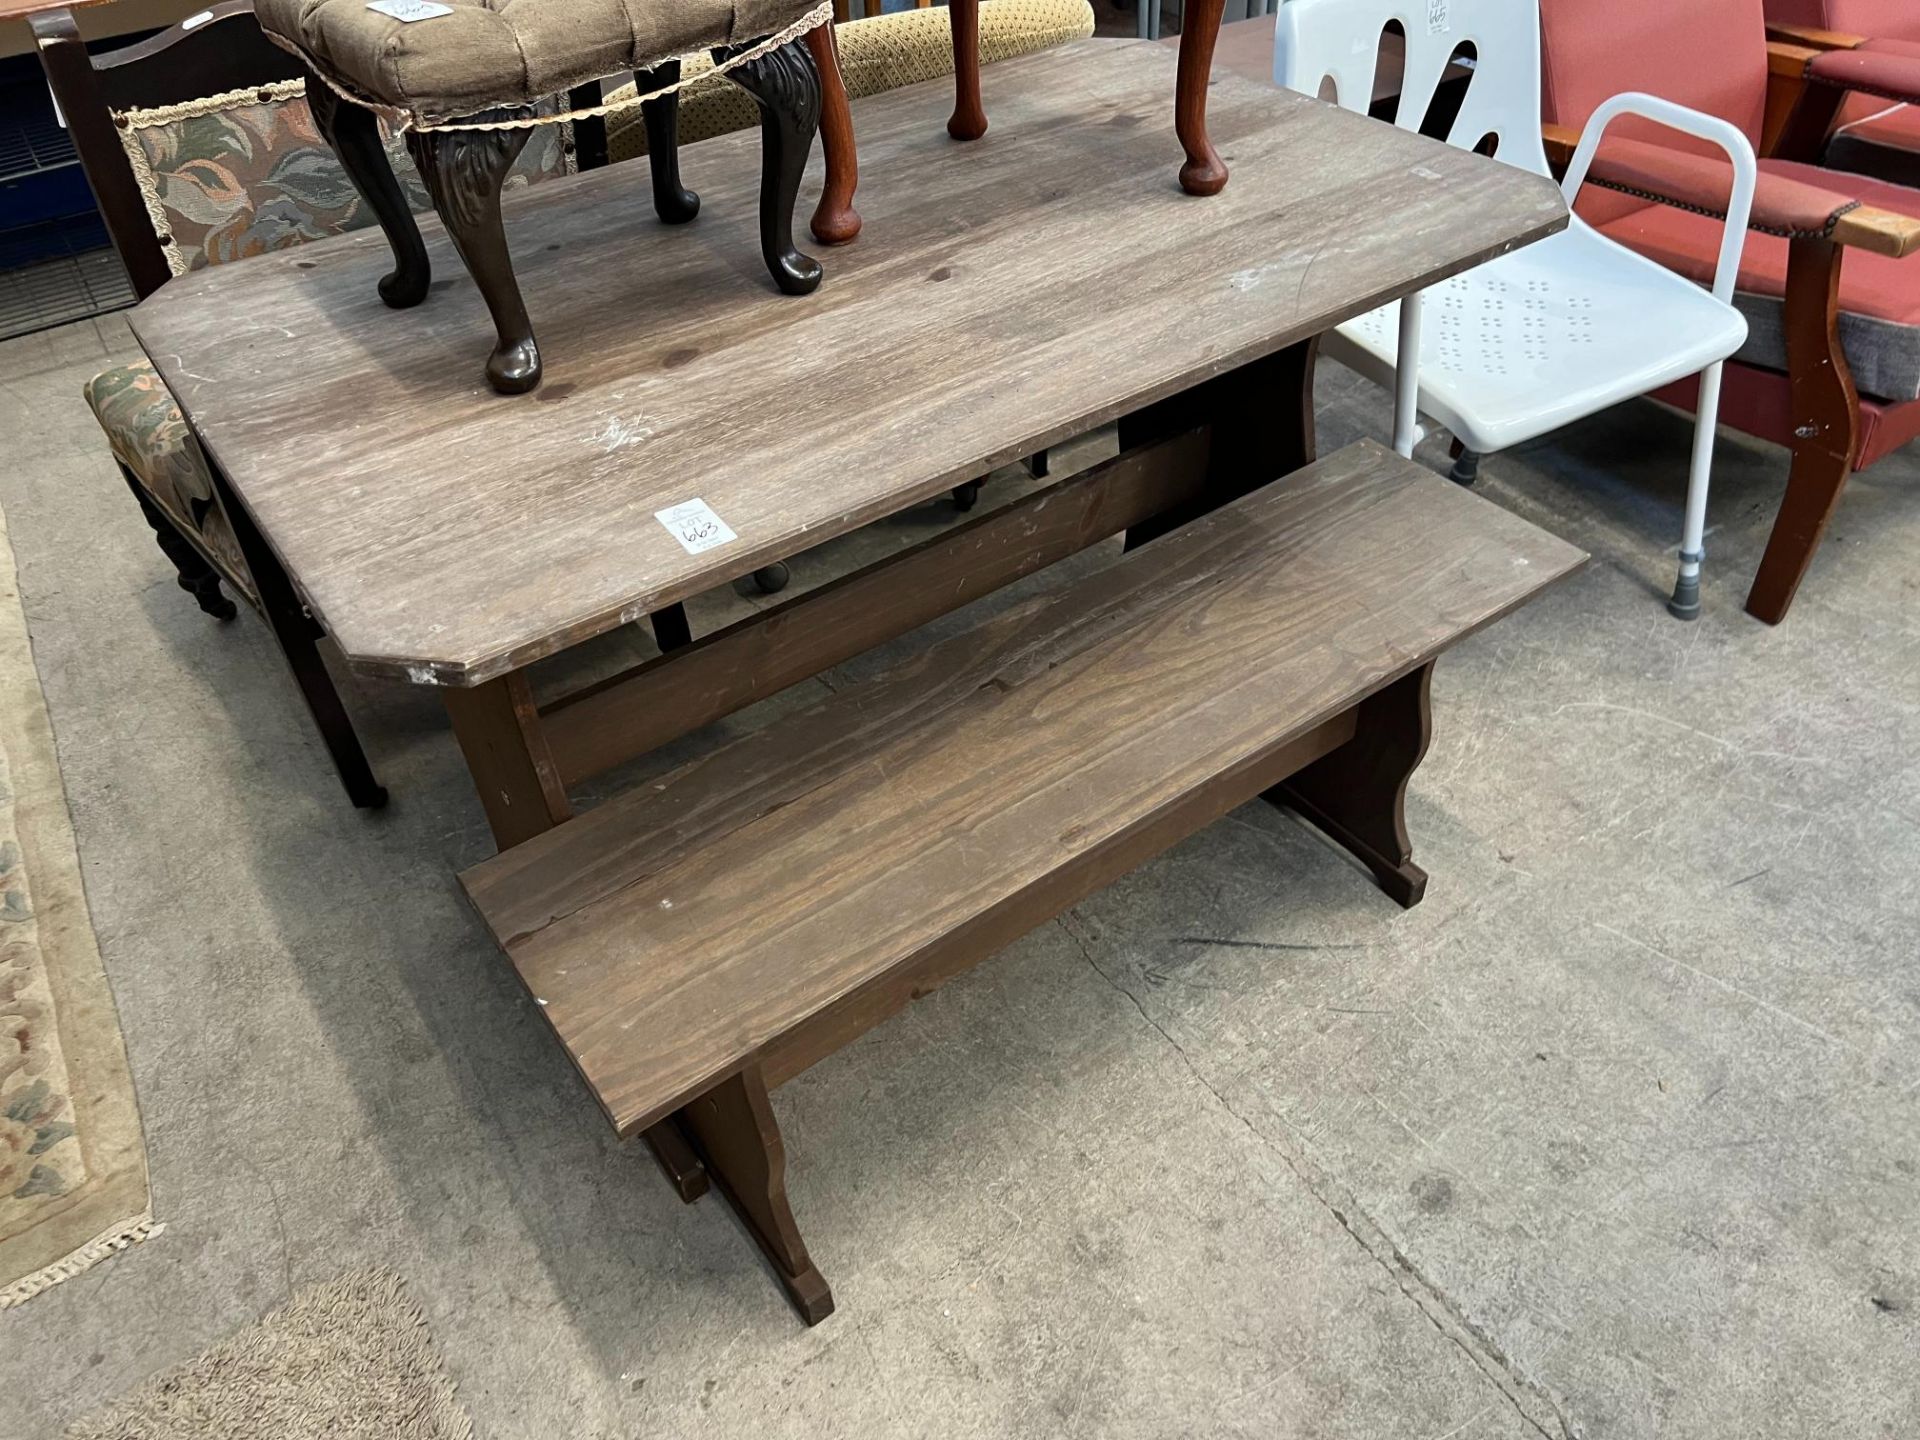 WOODEN TABLE AND BENCH